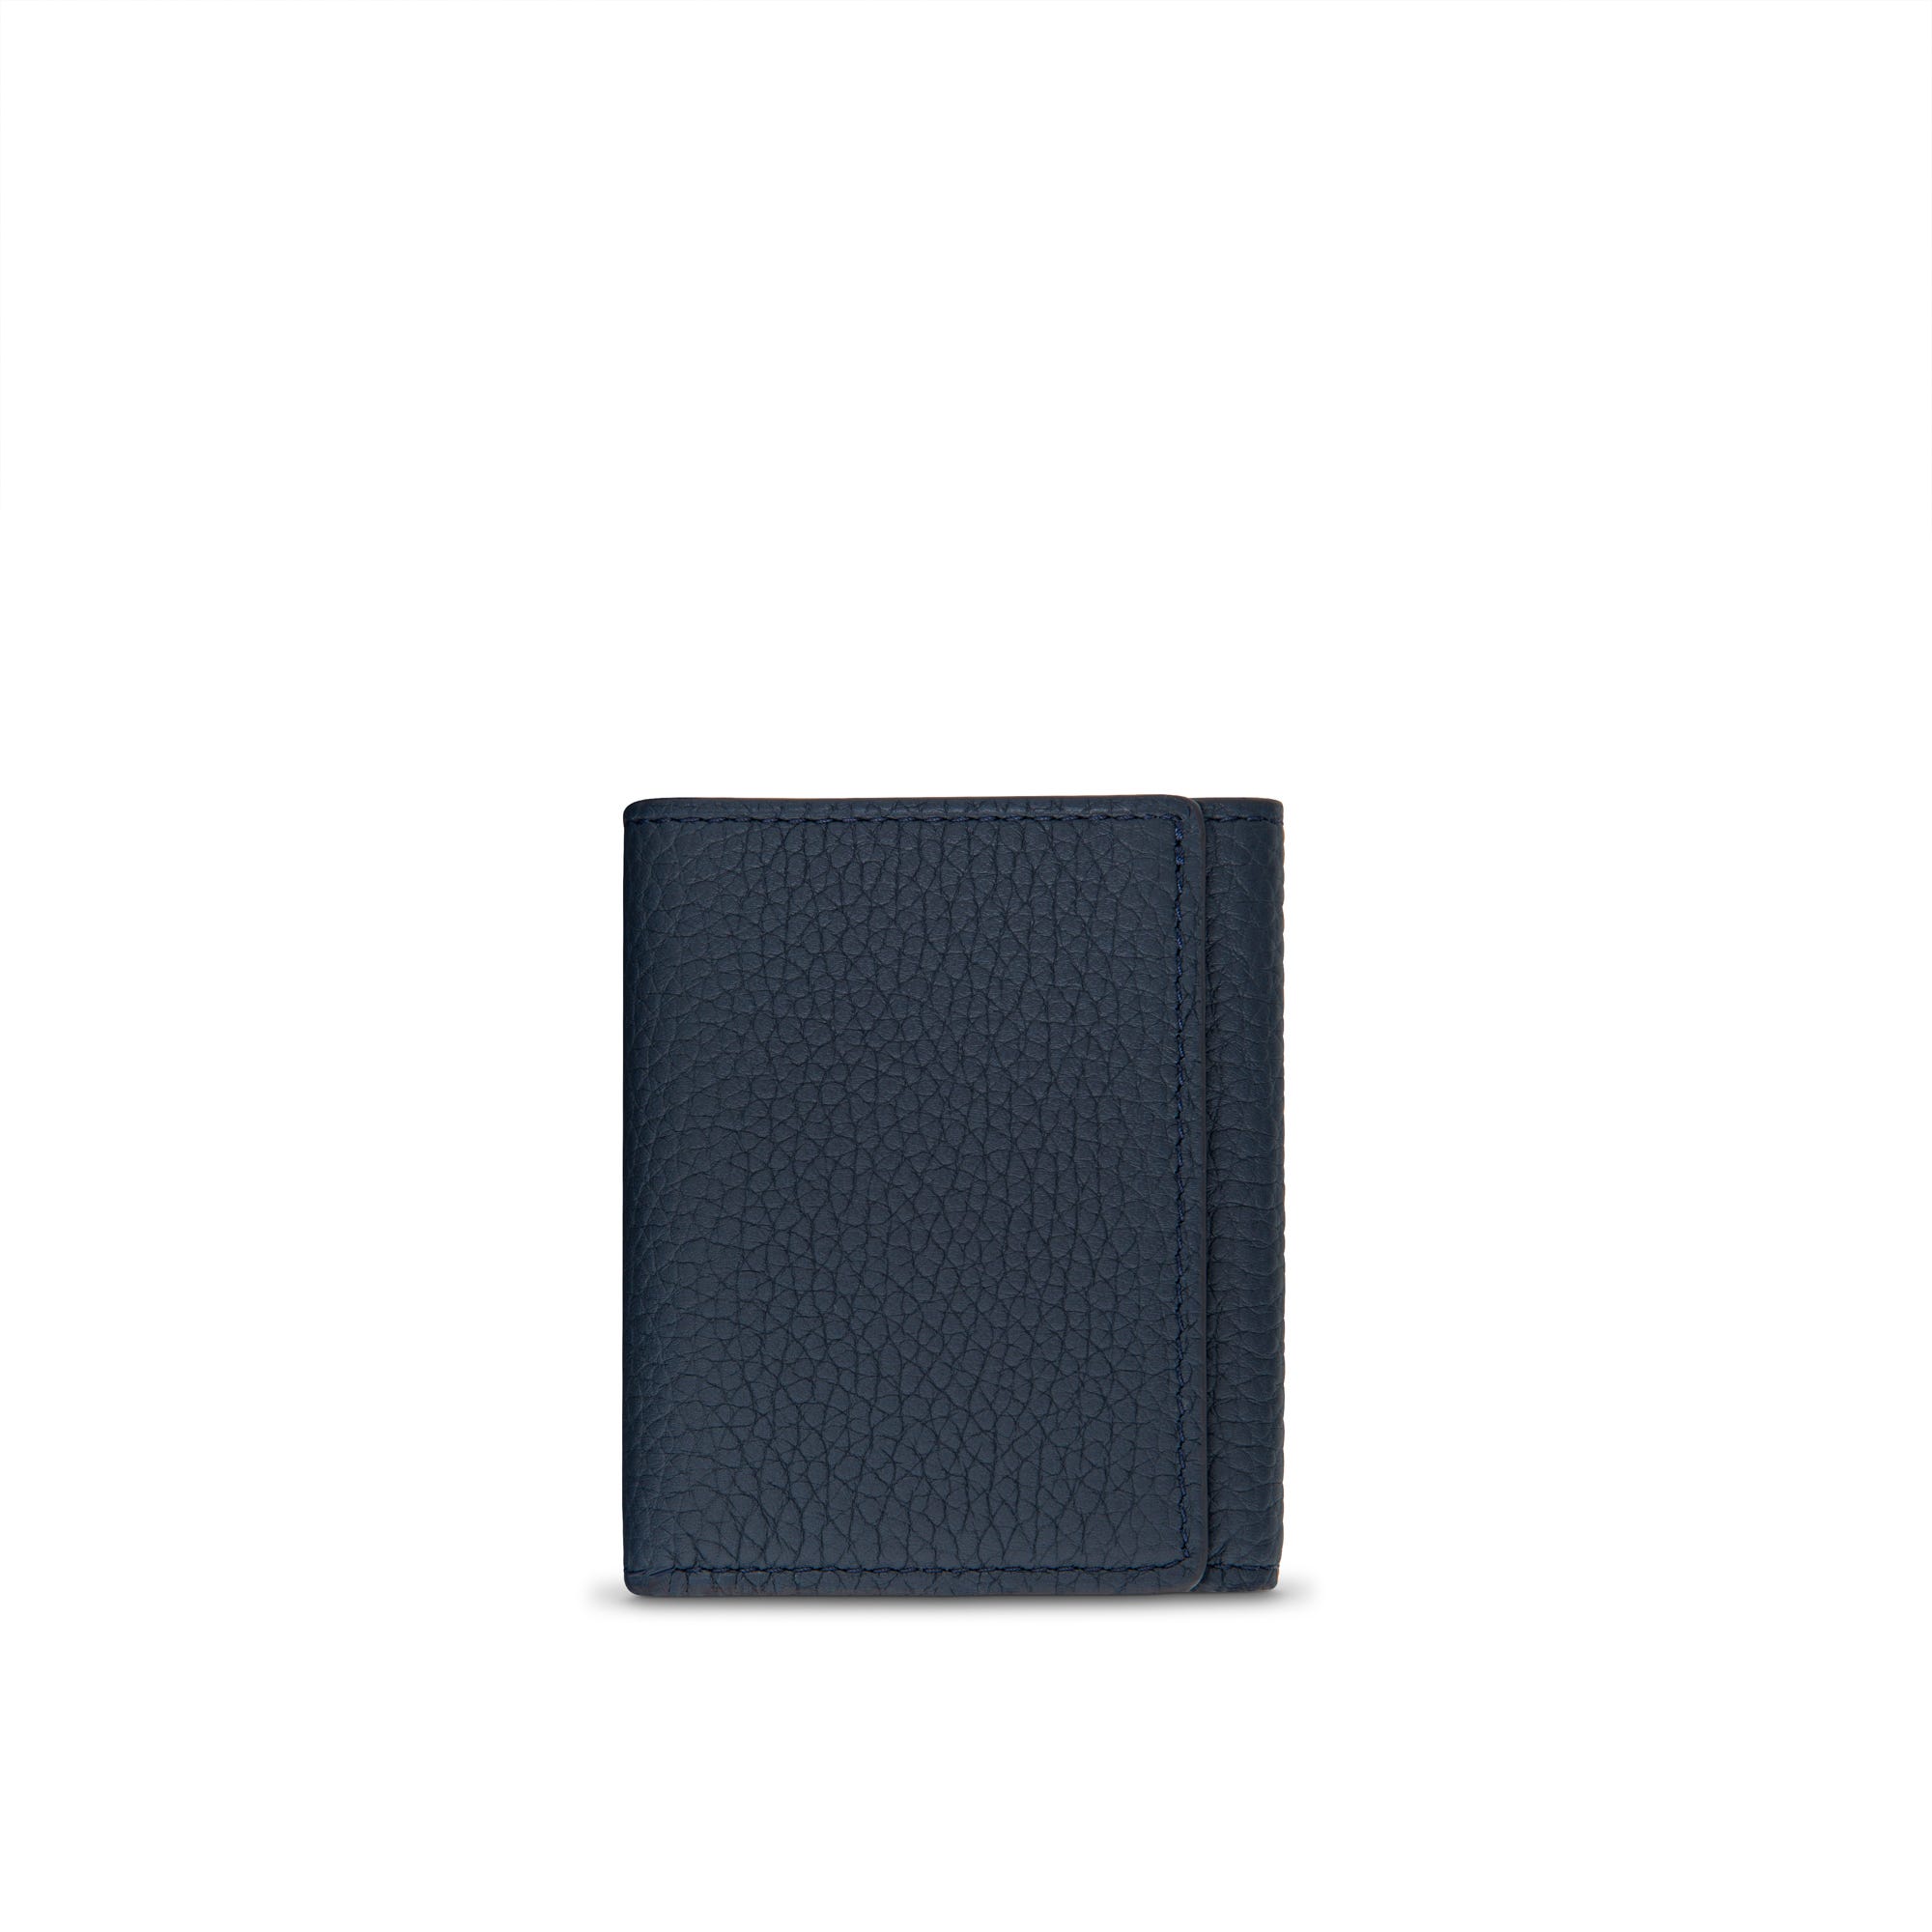 GMT Trifold Wallet in Marine Soft Grain Leather